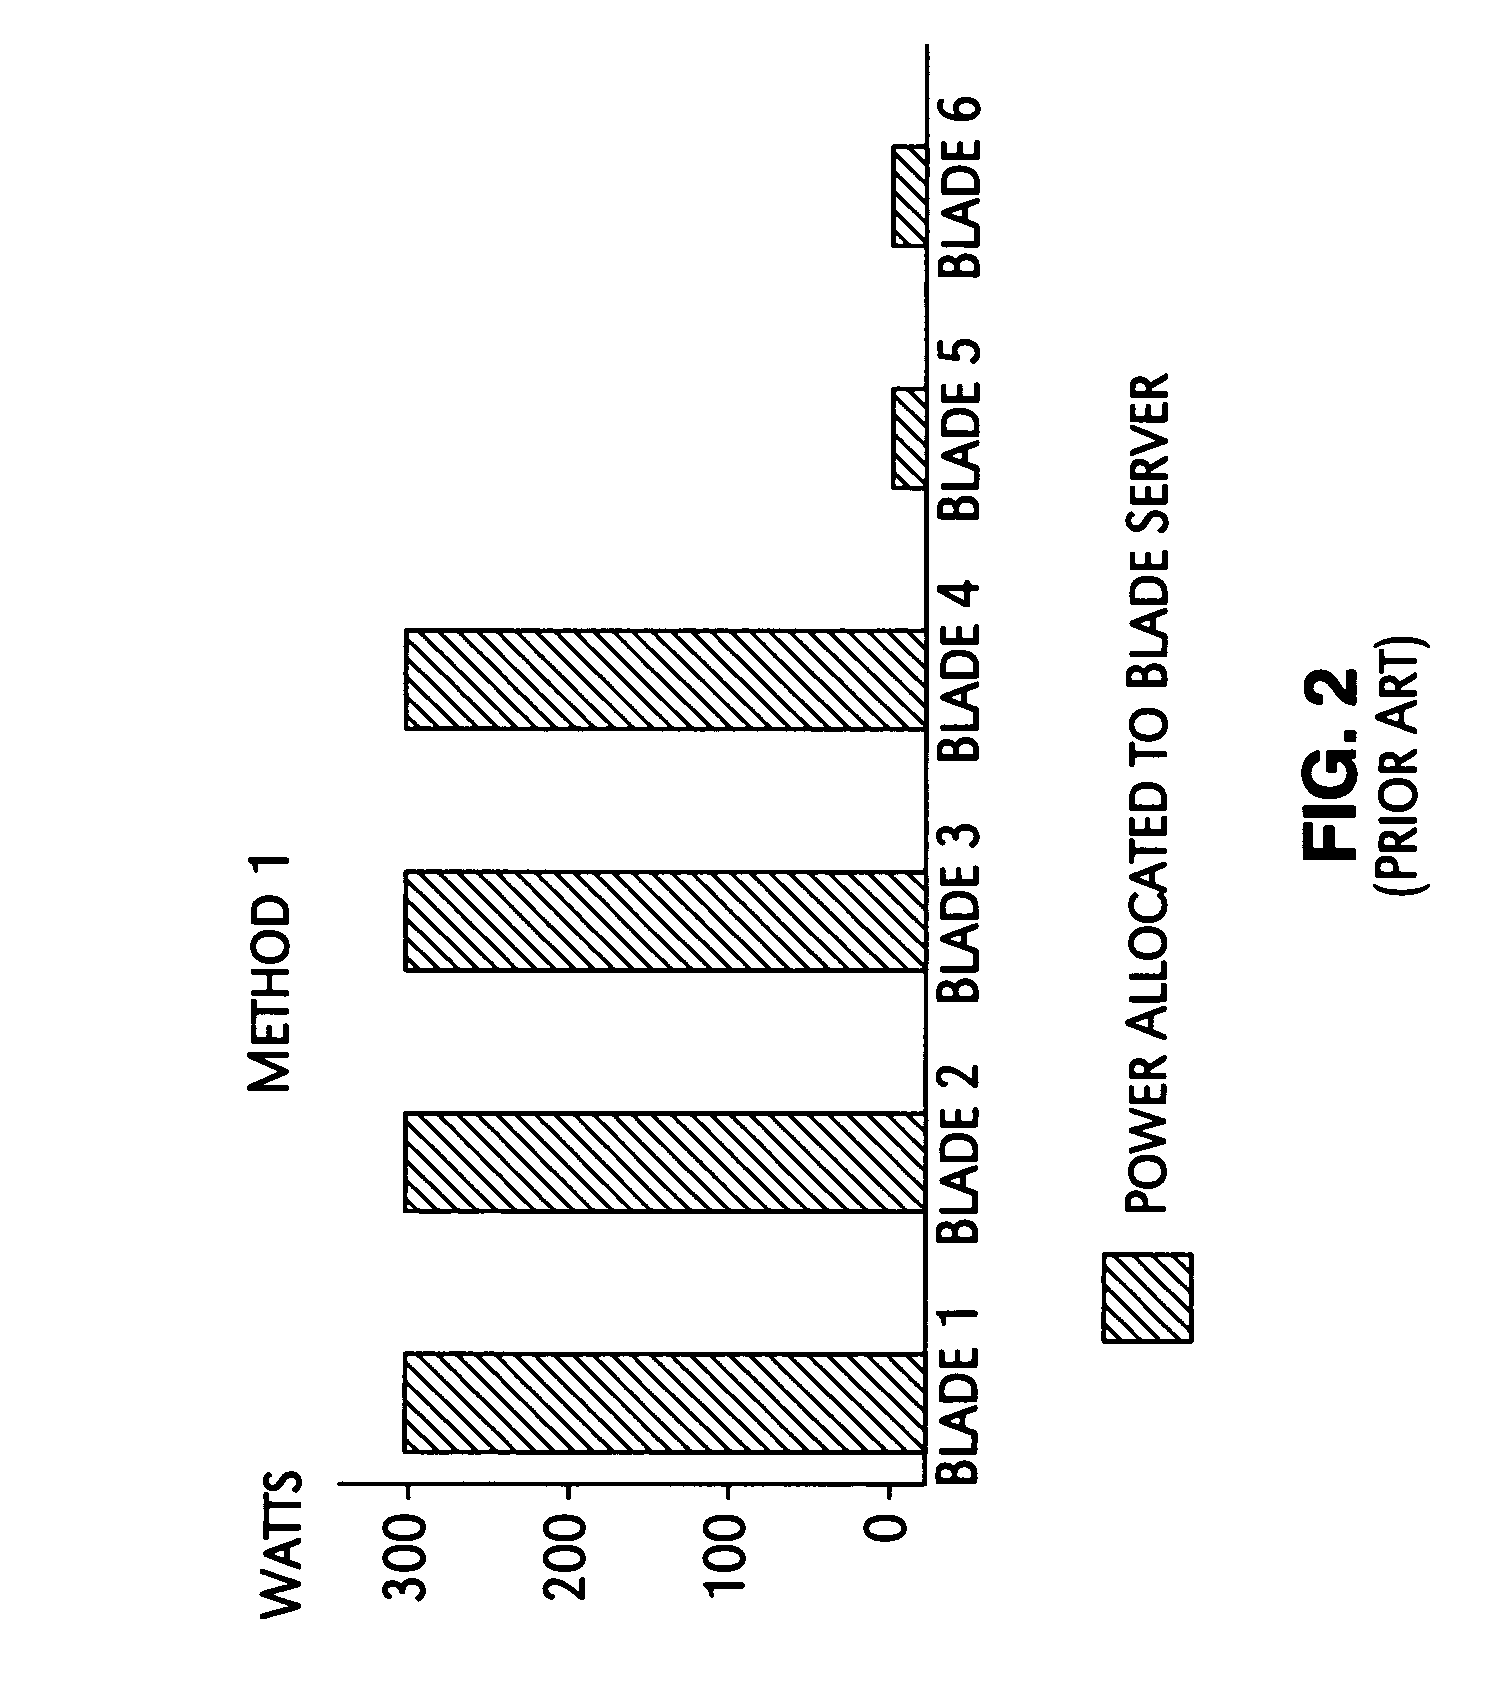 Method for maximizing server utilization in a resource constrained environment